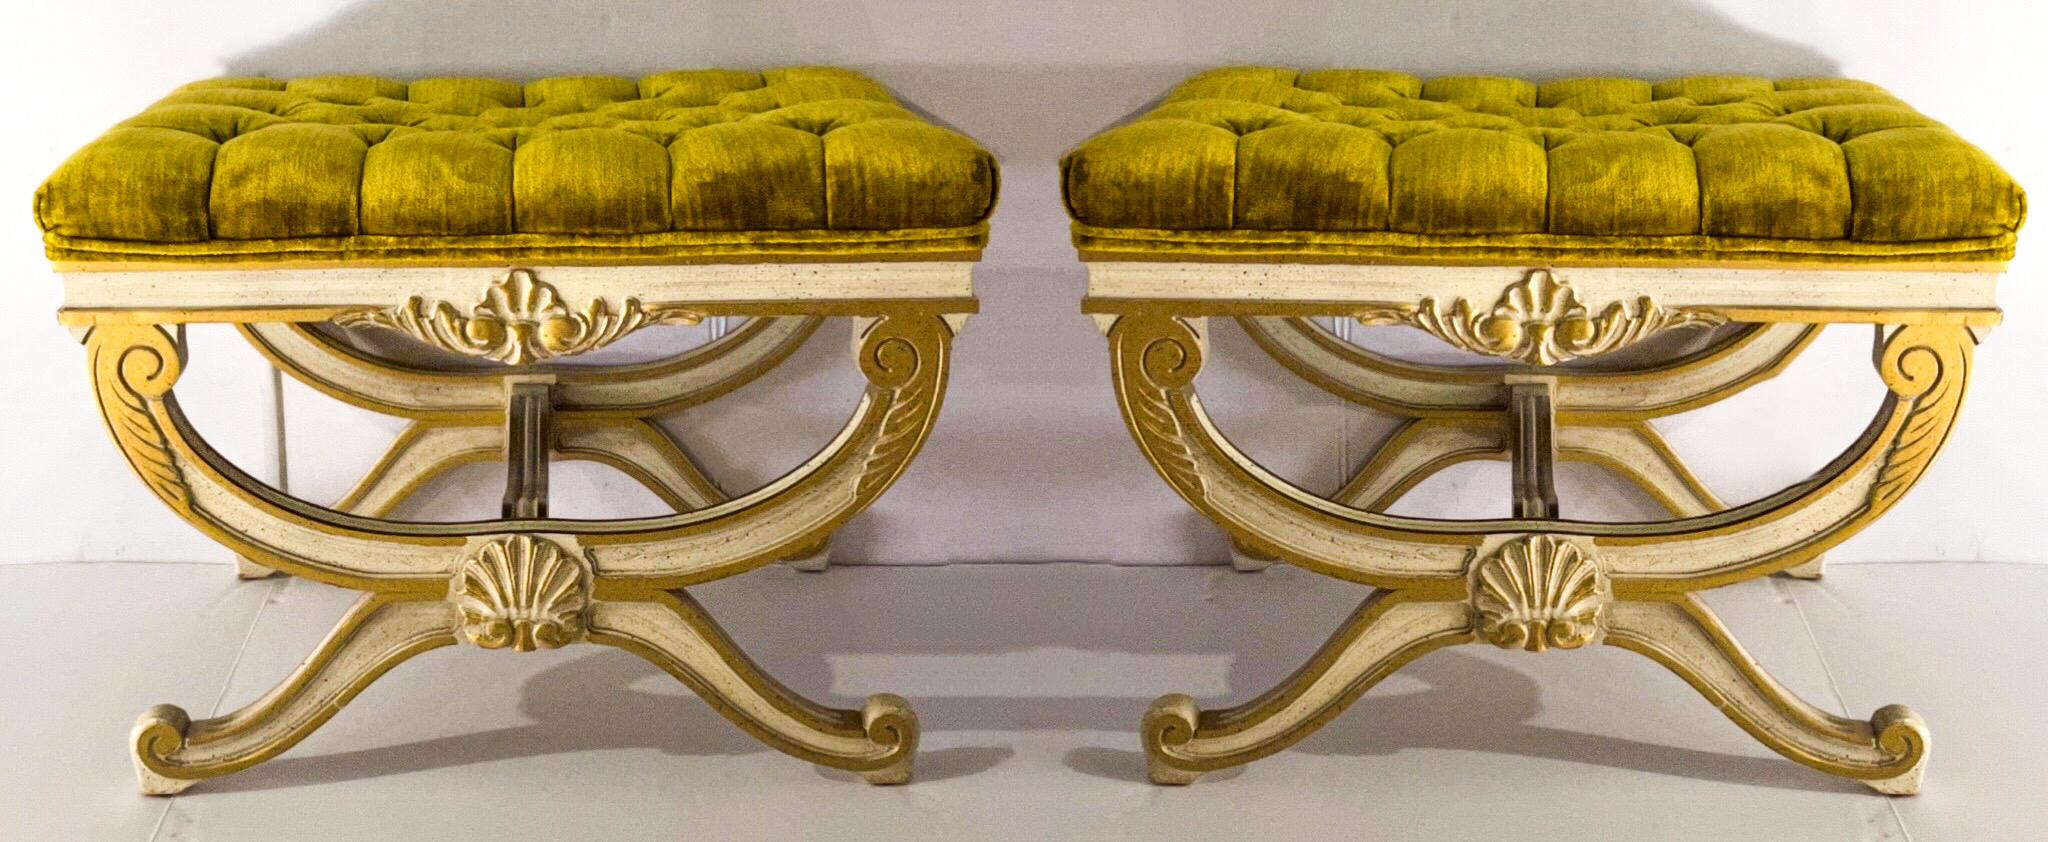 20th Century 1960s Neo-Classical Style Ottomans / Benches in Velvet, Pair